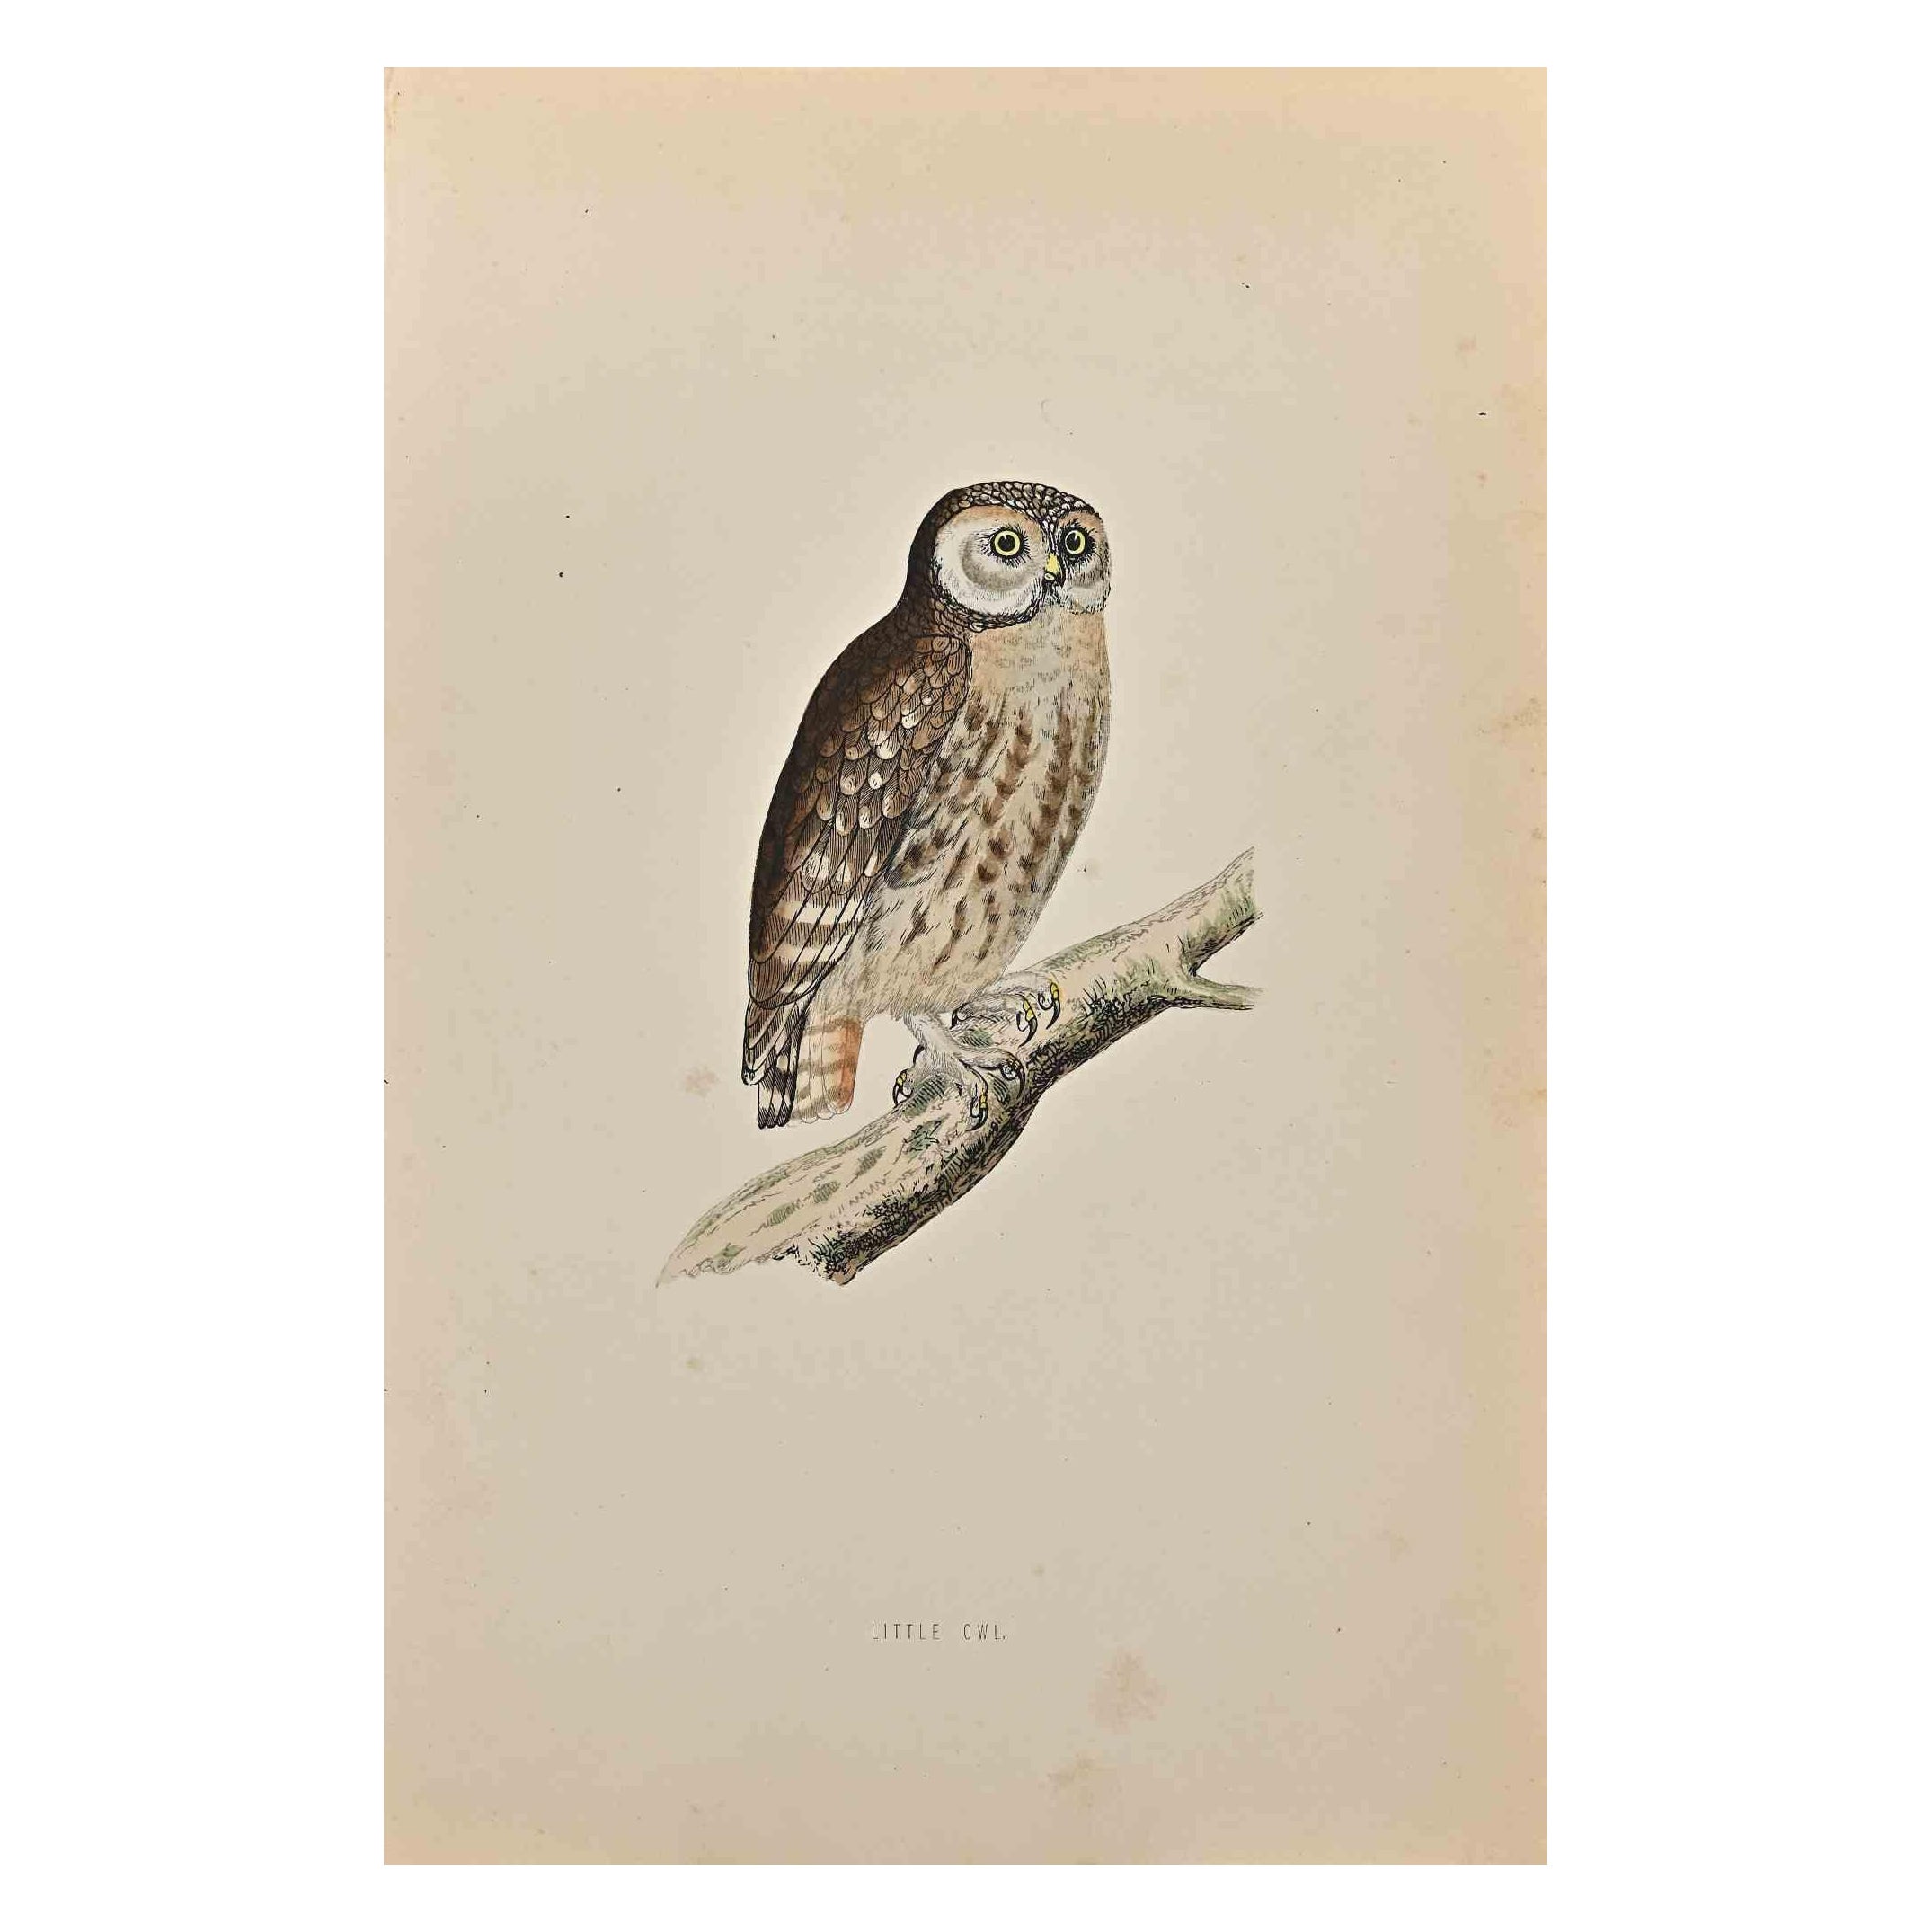 Little Owl is a modern artwork realized in 1870 by the British artist Alexander Francis Lydon (1836-1917).

Woodcut print on ivory-colored paper.

Hand-colored, published by London, Bell & Sons, 1870.  

The name of the bird is printed on the plate.